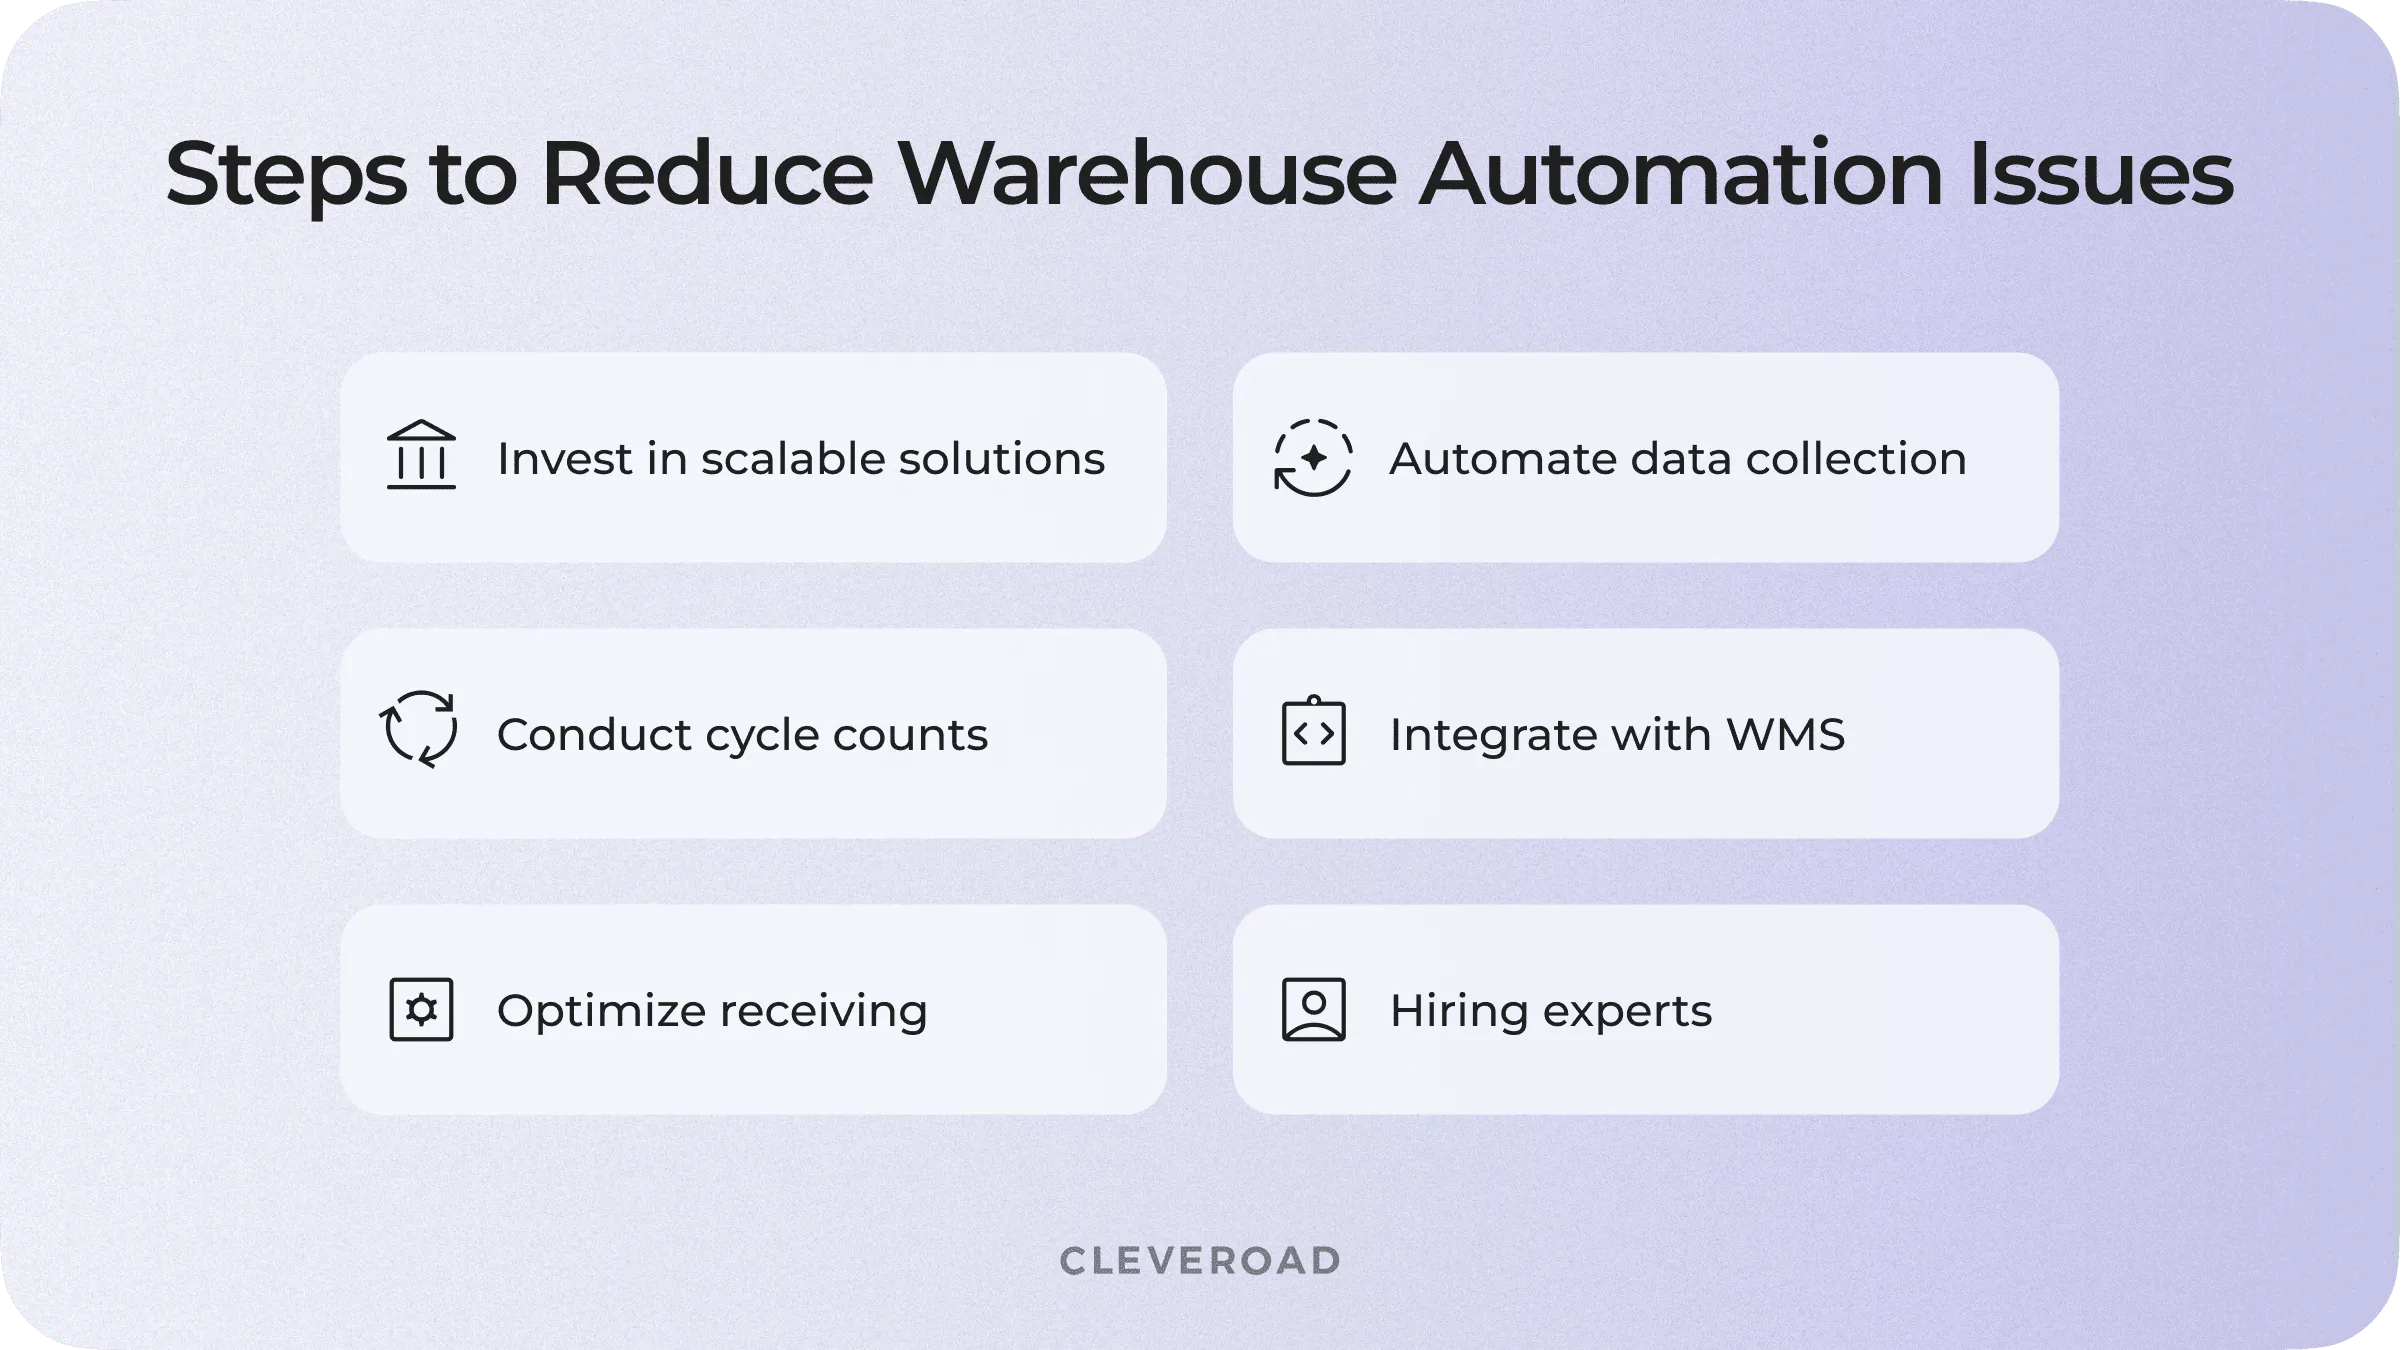 Steps to solve warehouse automation challenges